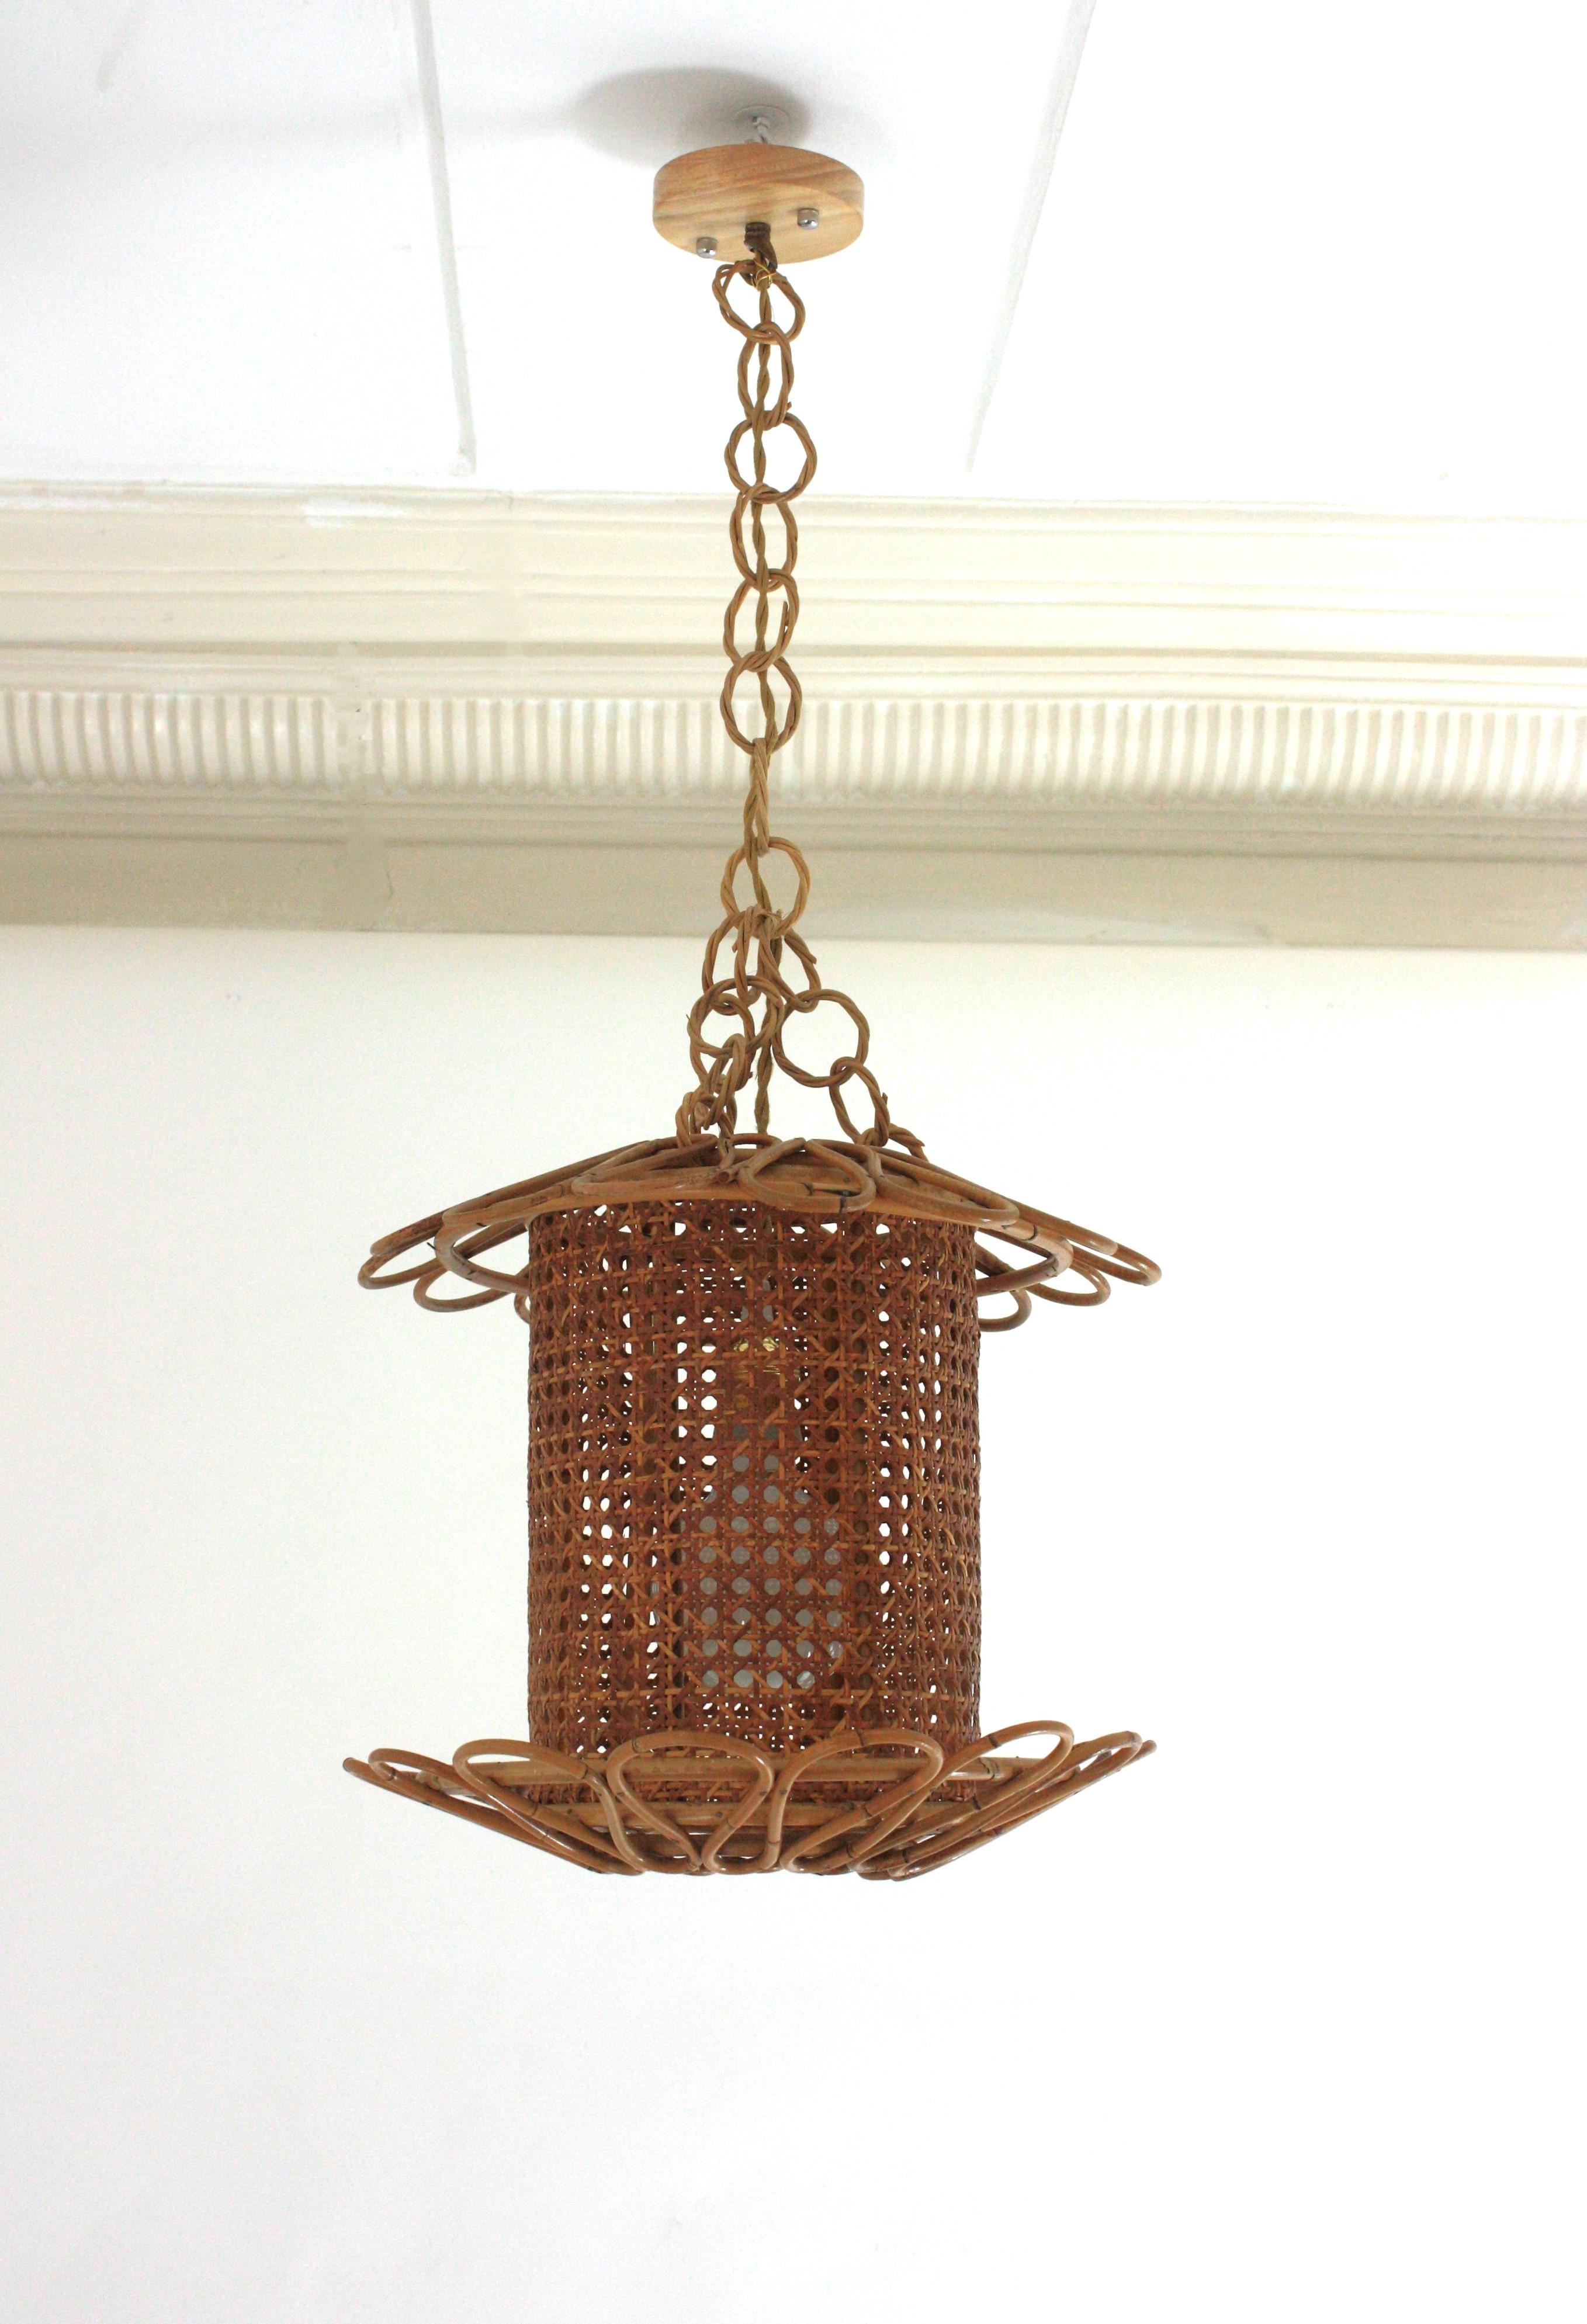 Italian Modernist Rattan & Wicker Wire Pendant Hanging Light, 1950s In Good Condition For Sale In Barcelona, ES